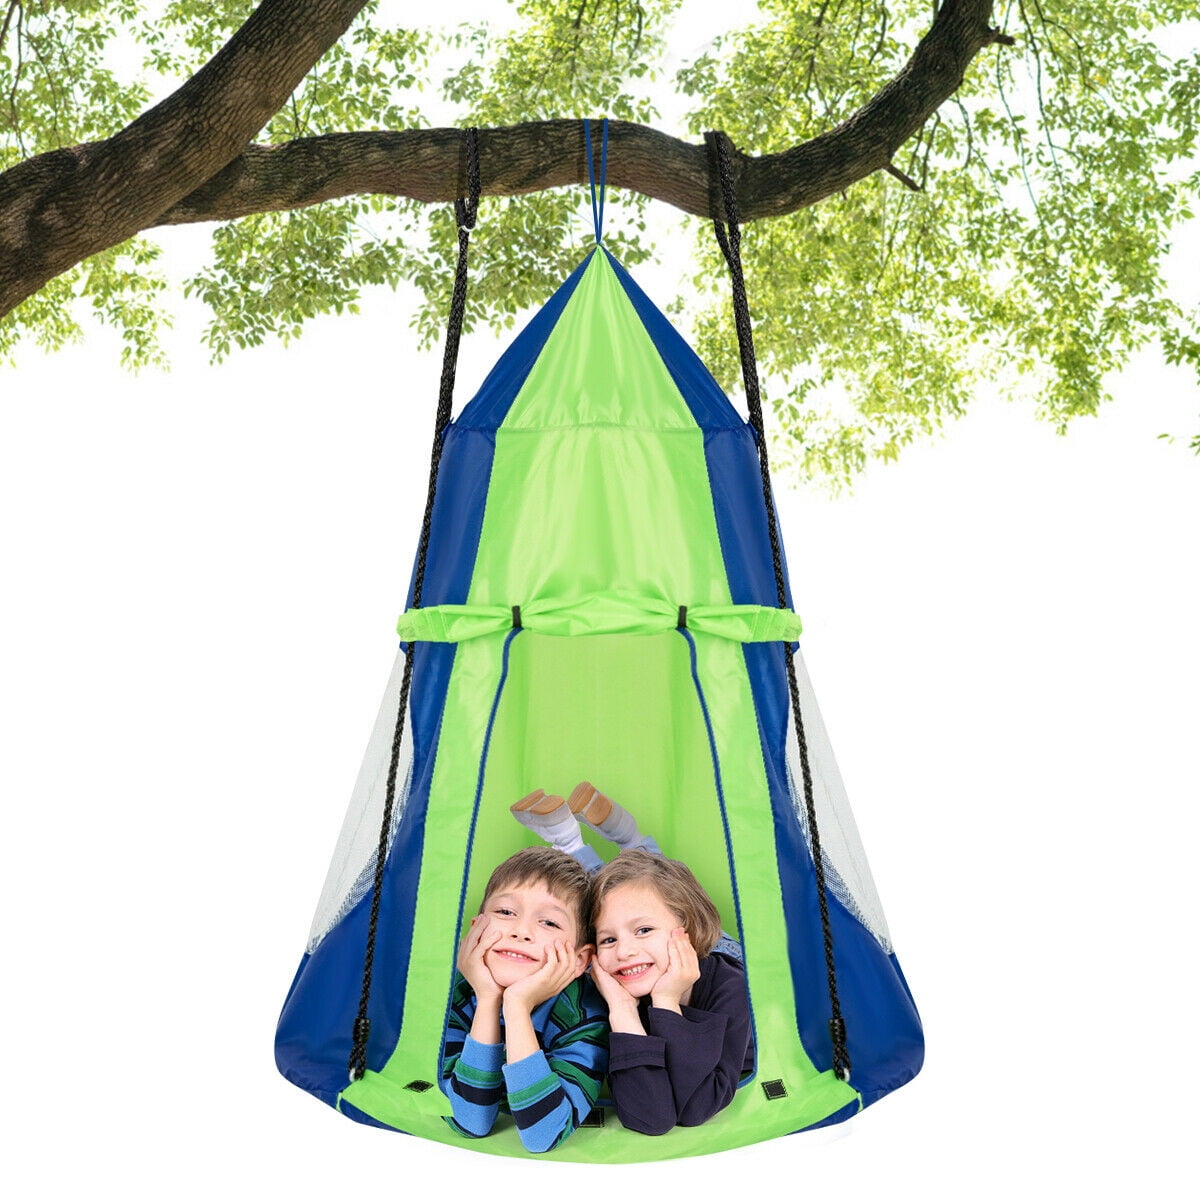 Portable Flying Saucer Hammock Couch Garden Patio Tree Swing Tent for Kids with Hanging Hook